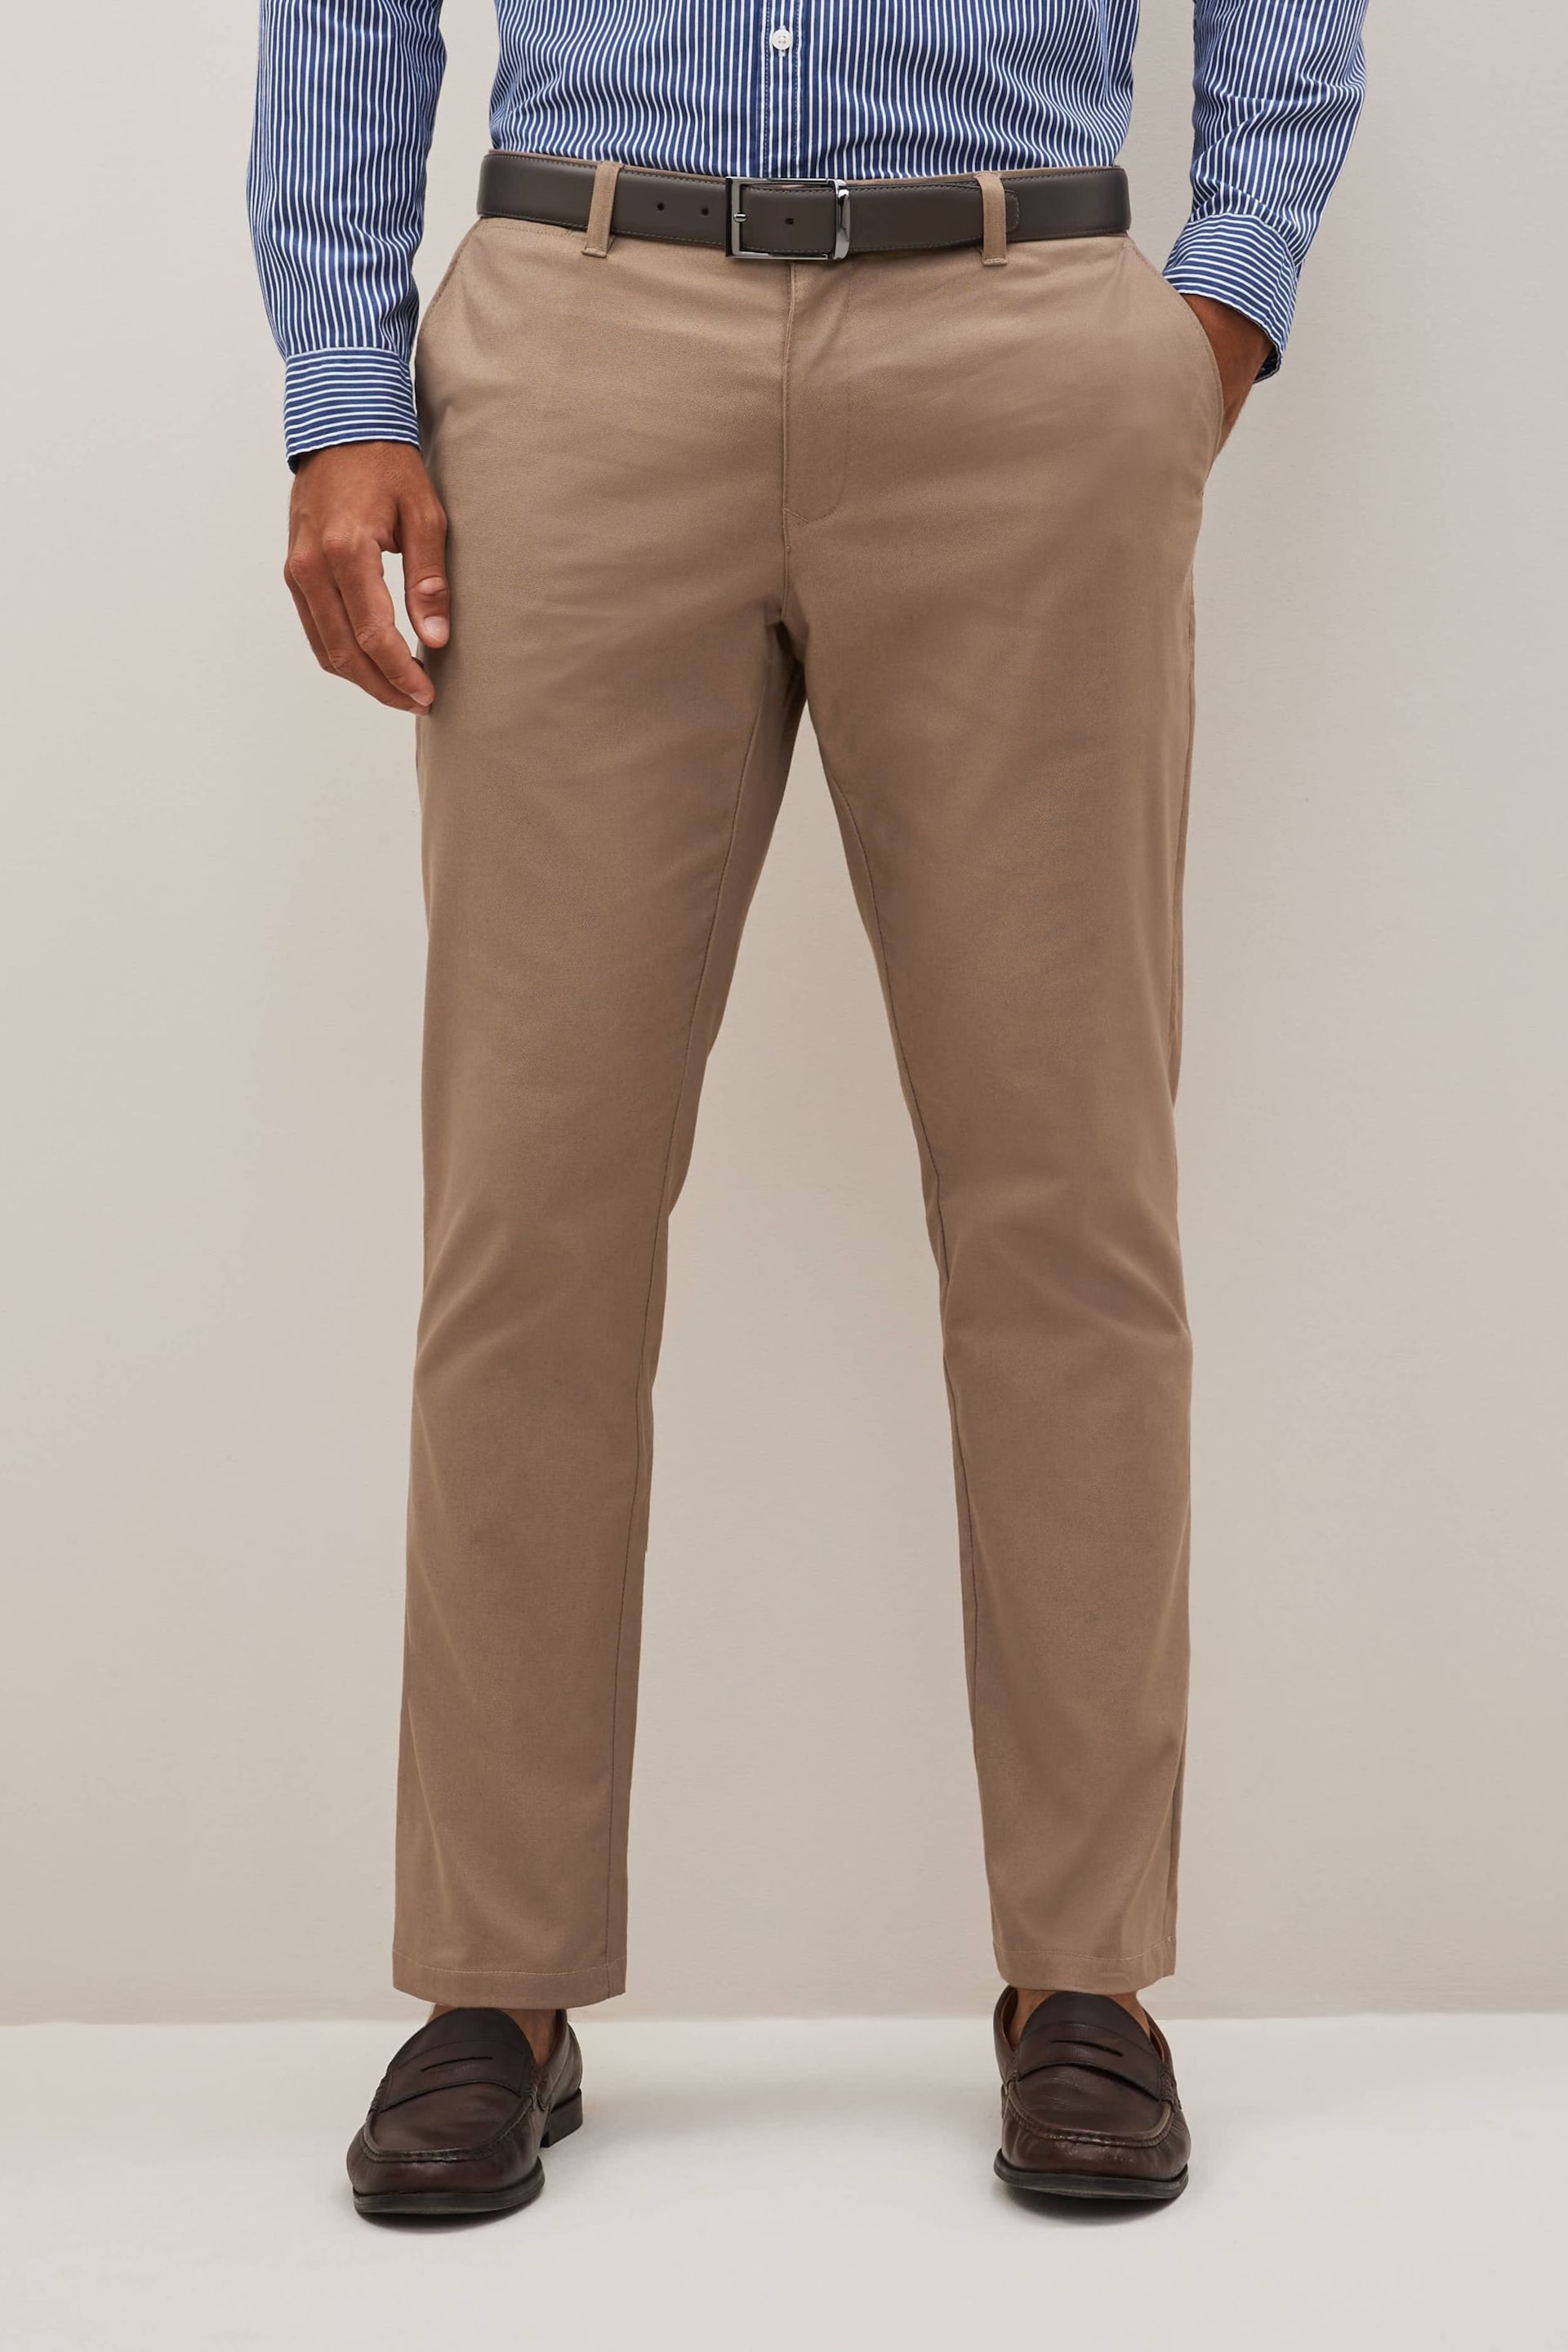 Stone Natural Slim Smart Chino Trousers - Image 1 of 10